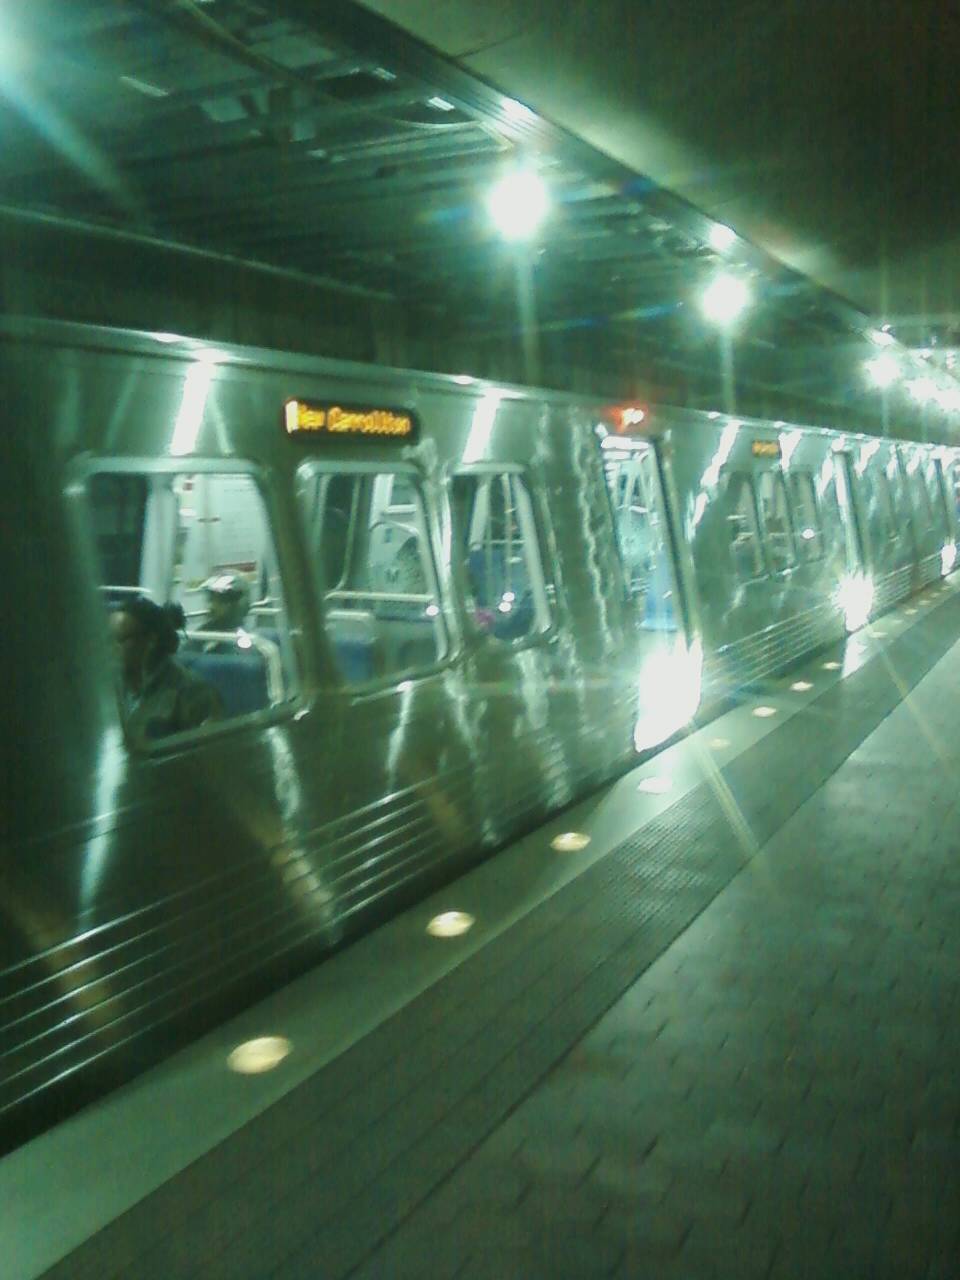 Shiny new 7000 series train servicing the Orange Line bound for New 
Carrollton, stops at L'Enfant Plaza's lower level platform. For further 
details, please visit www.wirelessnotes.org.